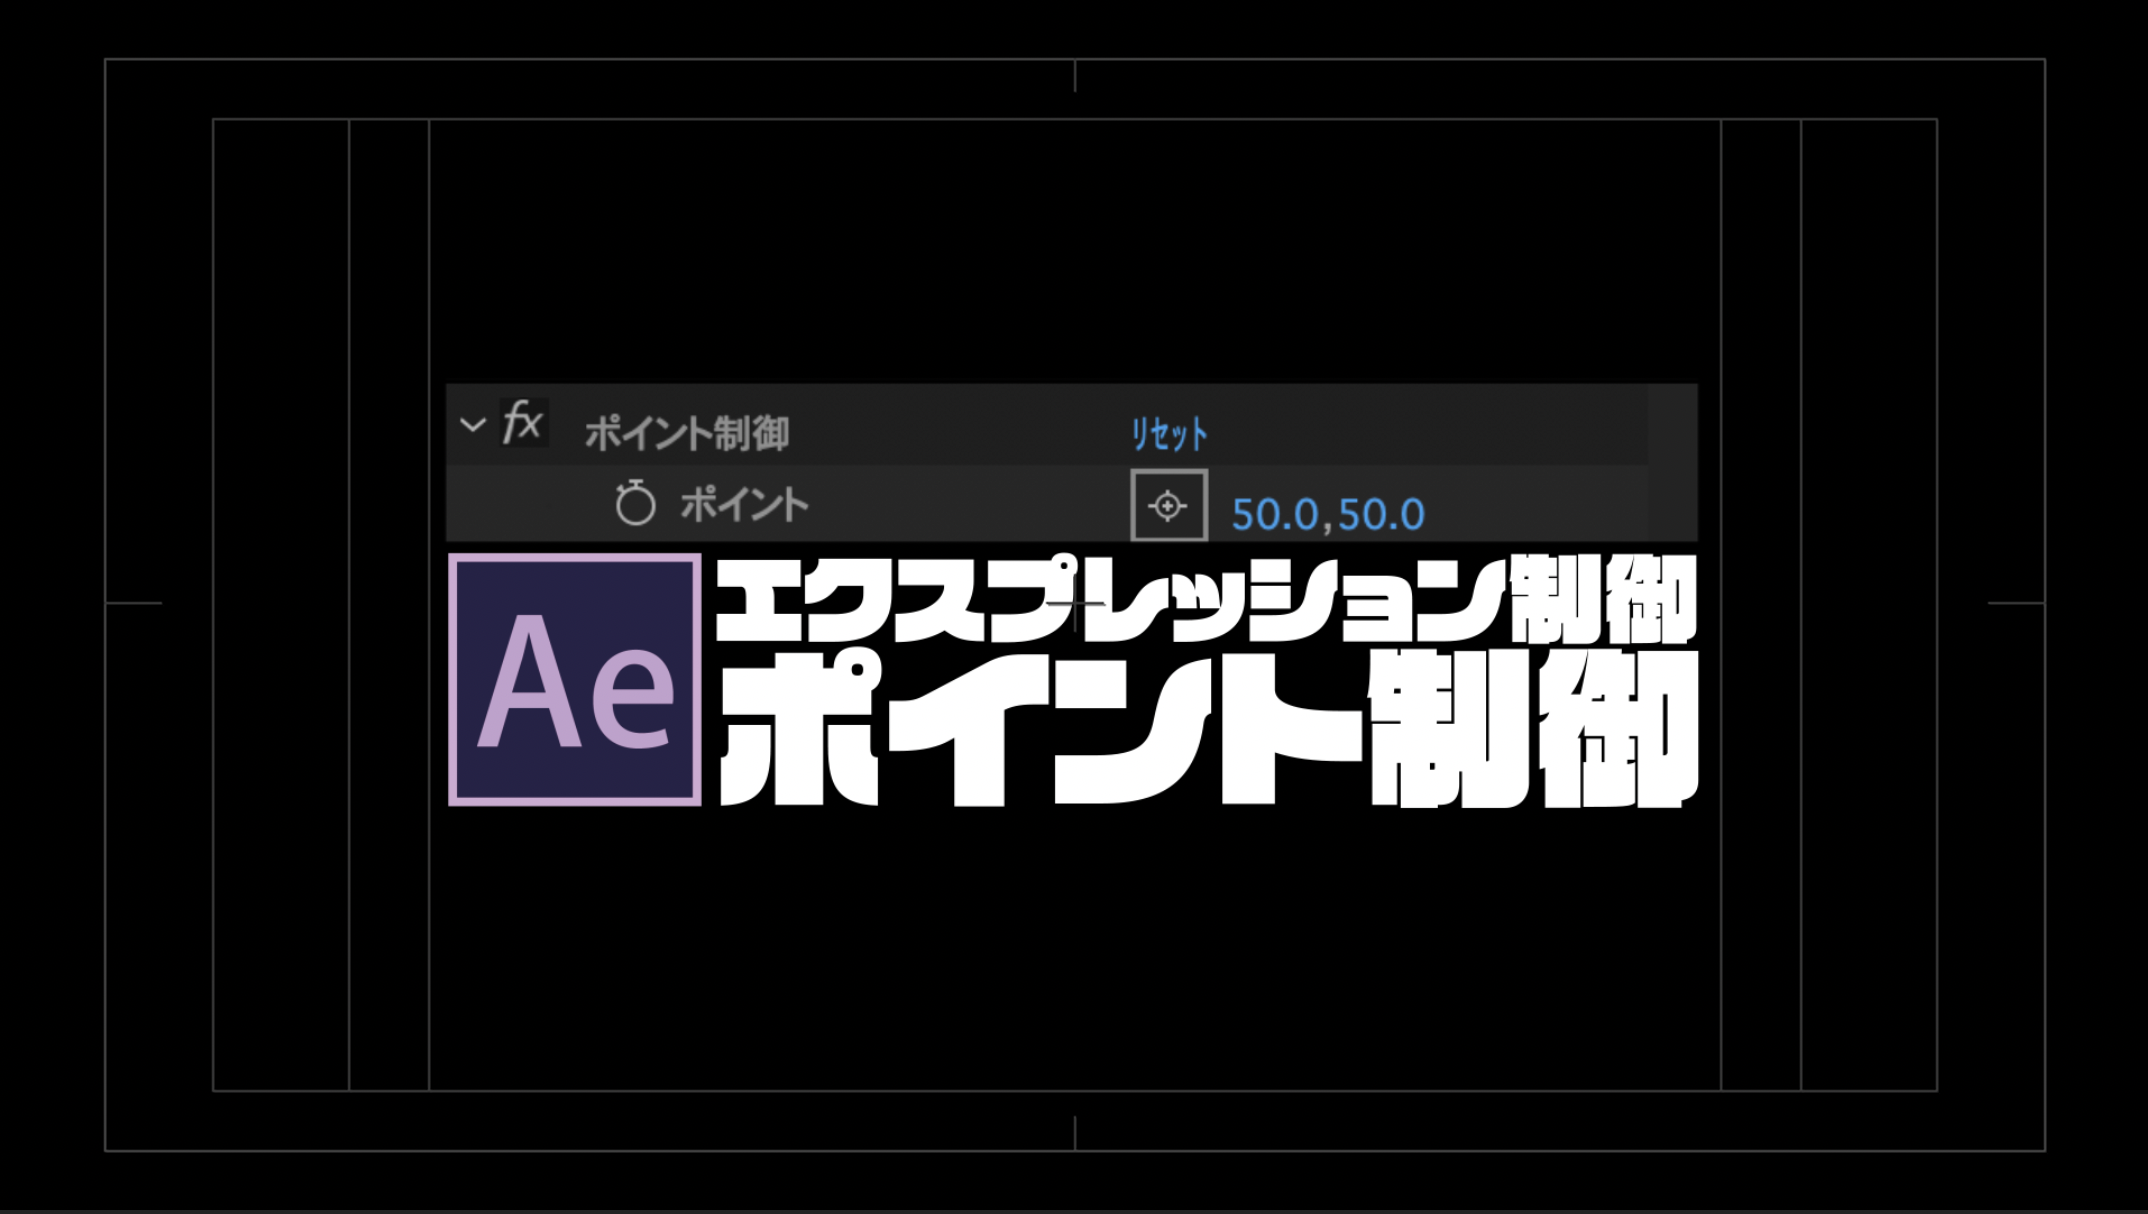 [AfterEffects]エクスプレッション制御のポイント制御解説